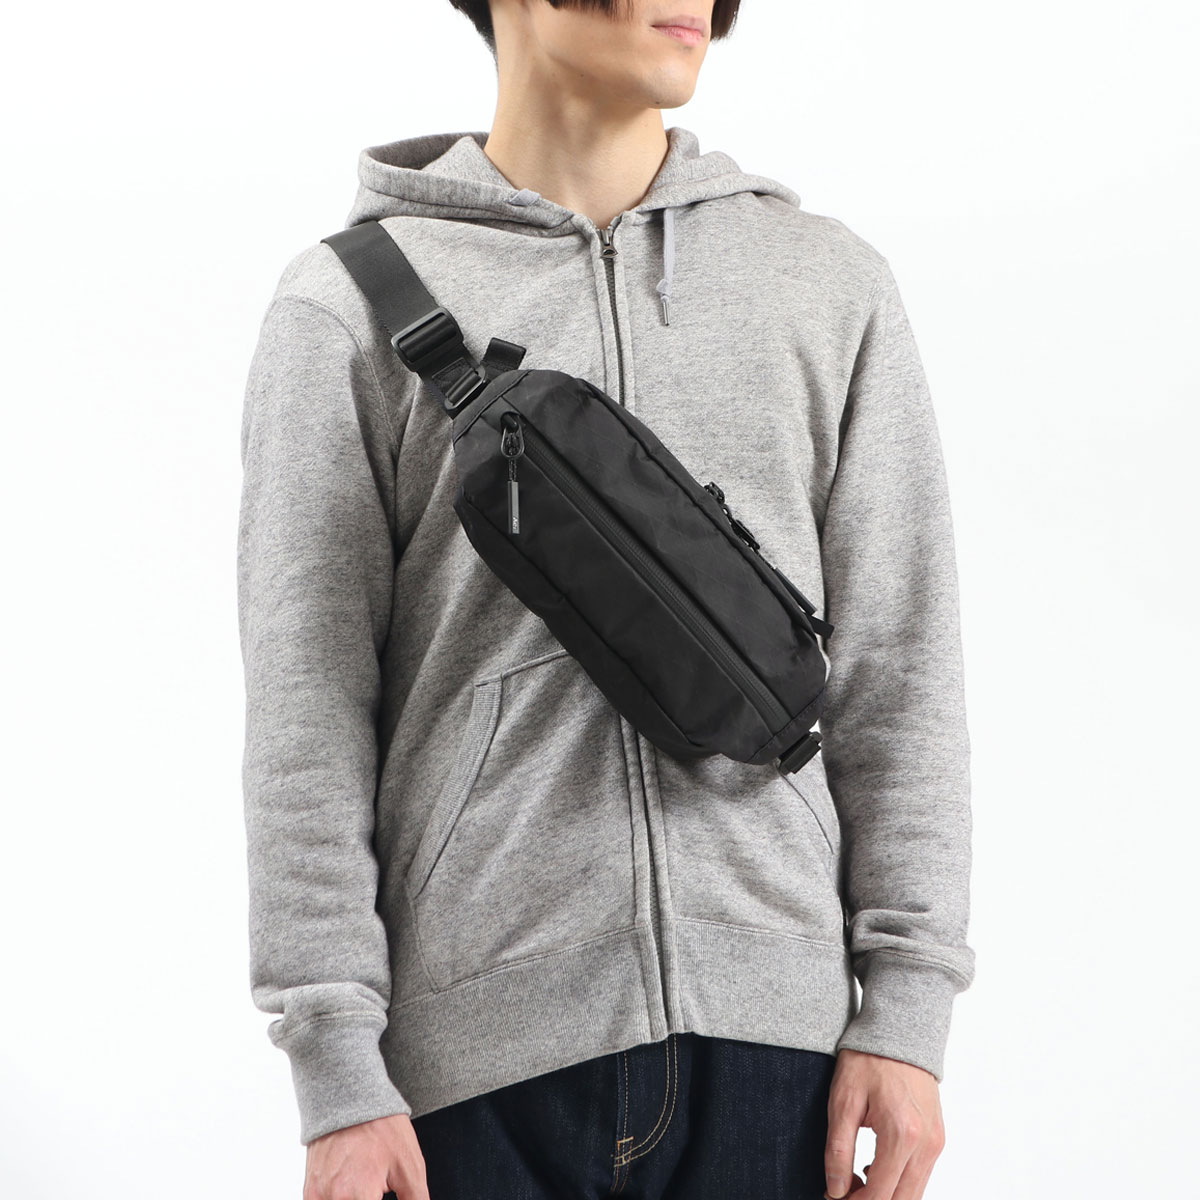 Aer エアー City Collection City Sling 2 X-Pac ボディバッグ 2.5L 